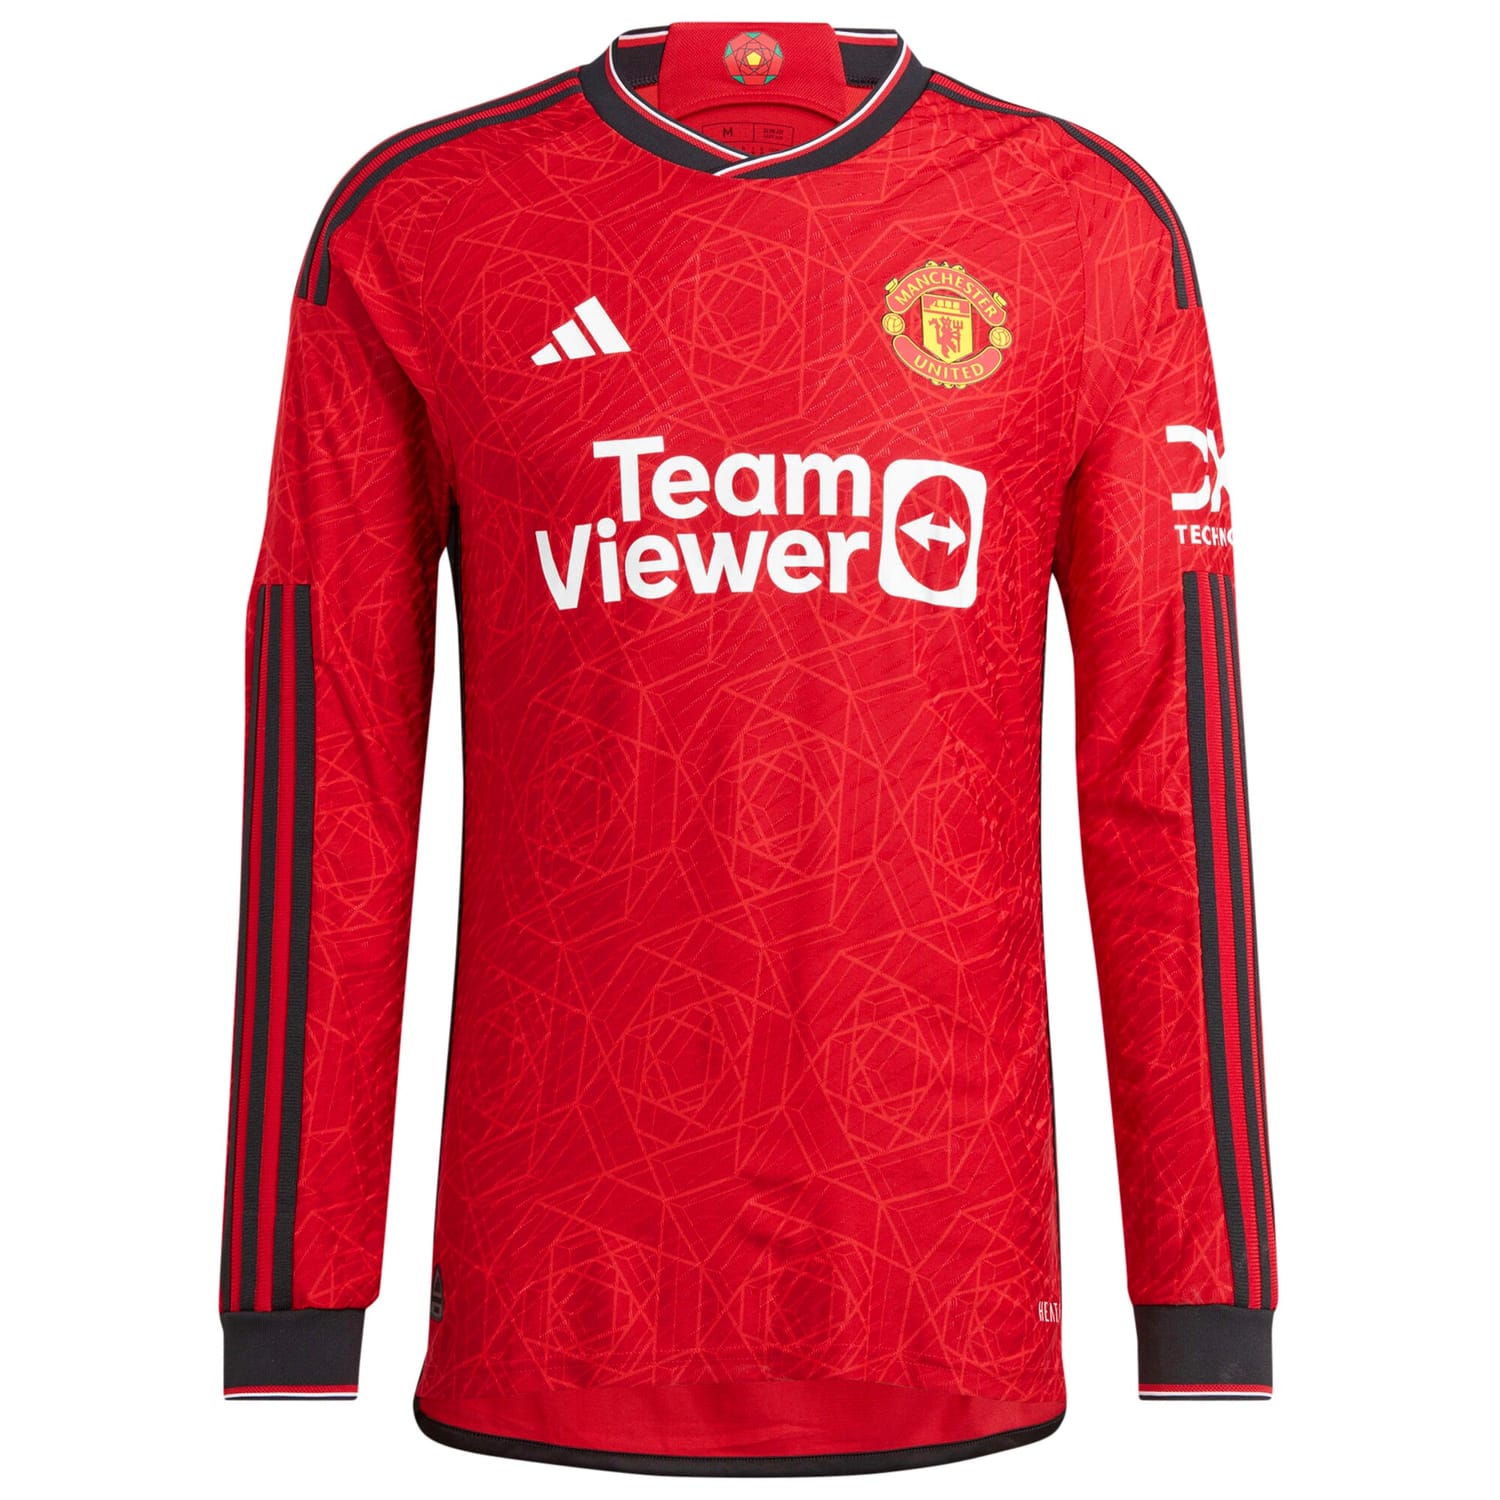 Premier League Manchester United Home Cup Authentic Jersey Shirt Long Sleeve 2023-24 player Irene Guerrero printing for Men